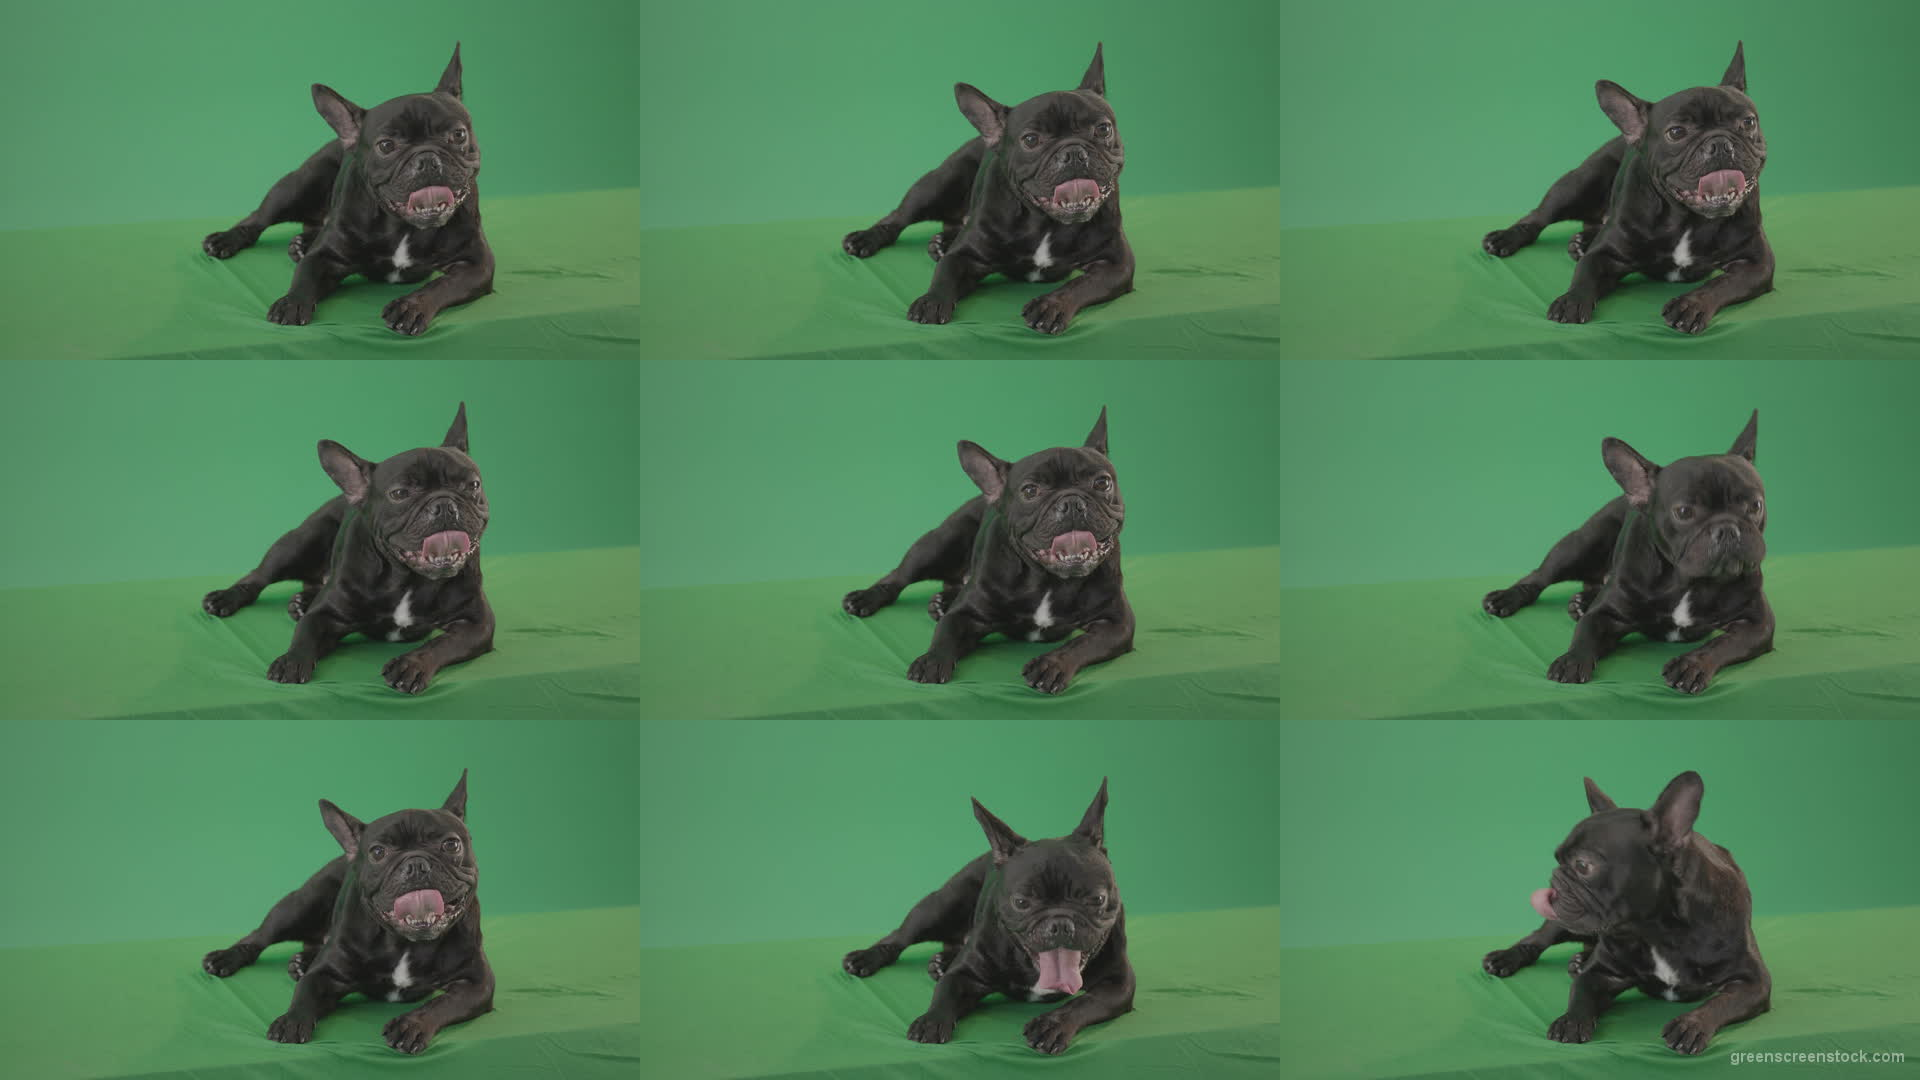 Boring-black-French-Bulldog-chilling-like-a-Bos-on-green-screen-4K-Video-Footage-1920 Green Screen Stock